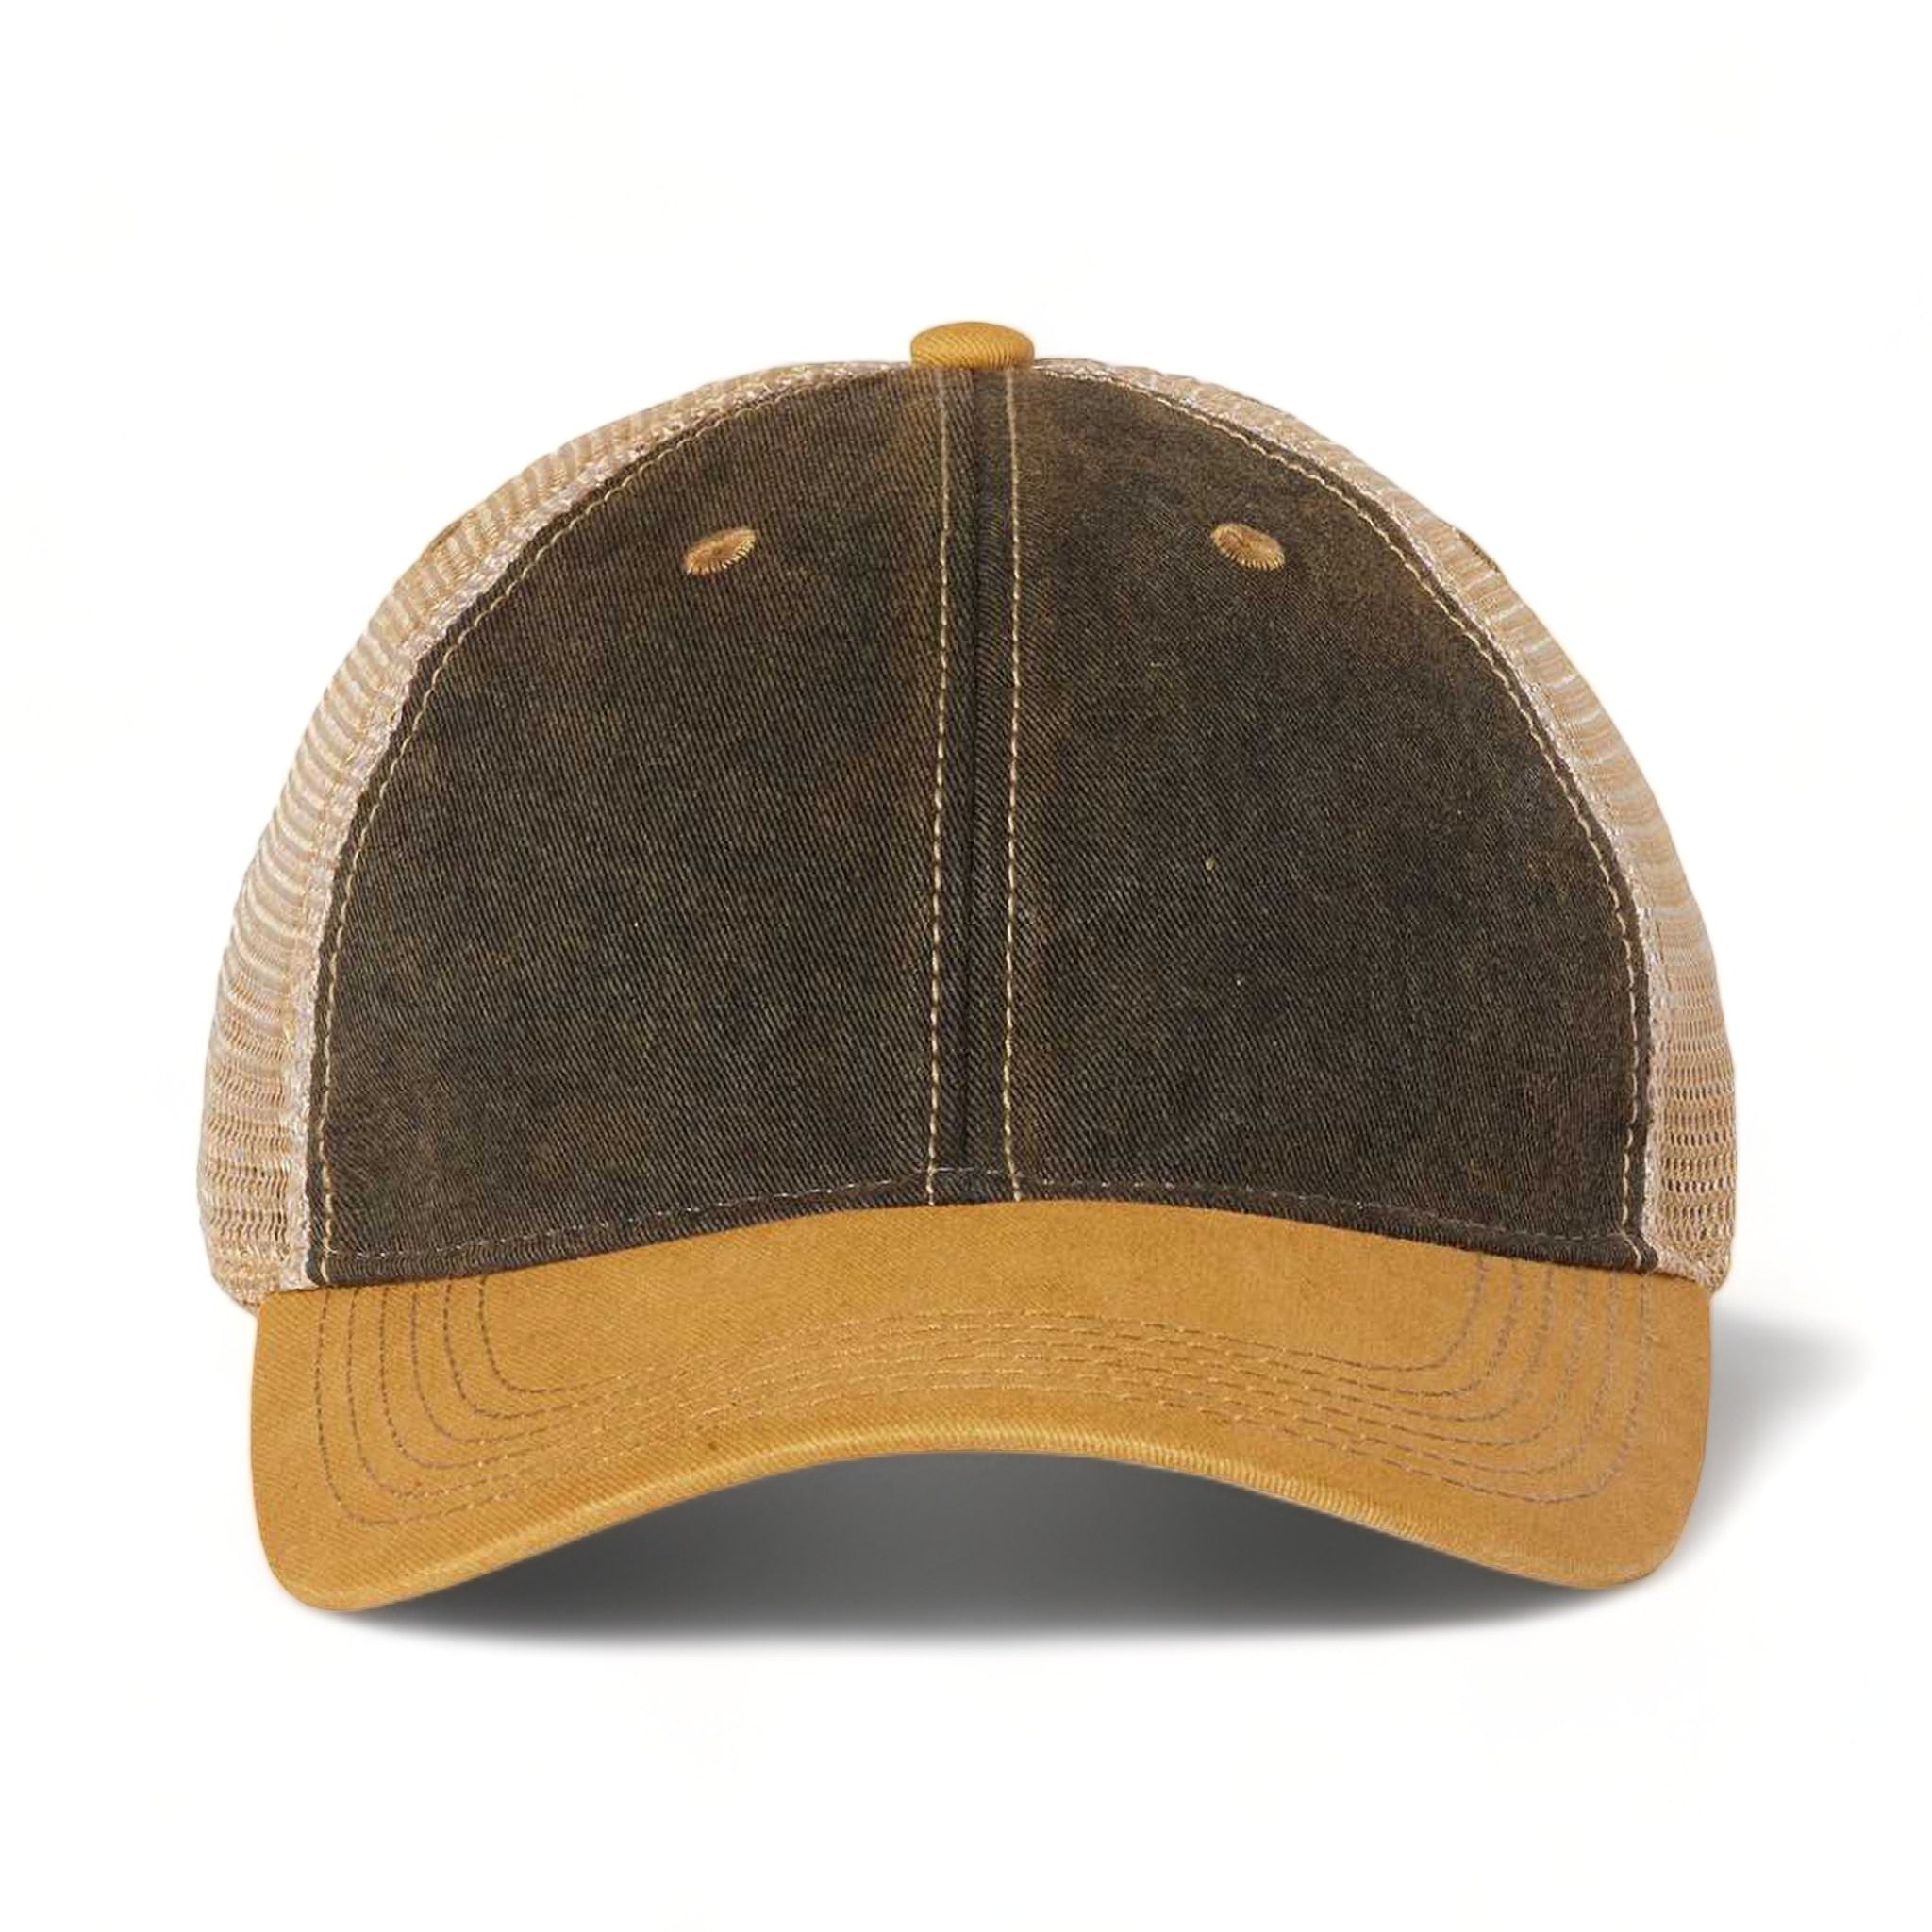 Front view of LEGACY OFA custom hat in black, yellow and khaki